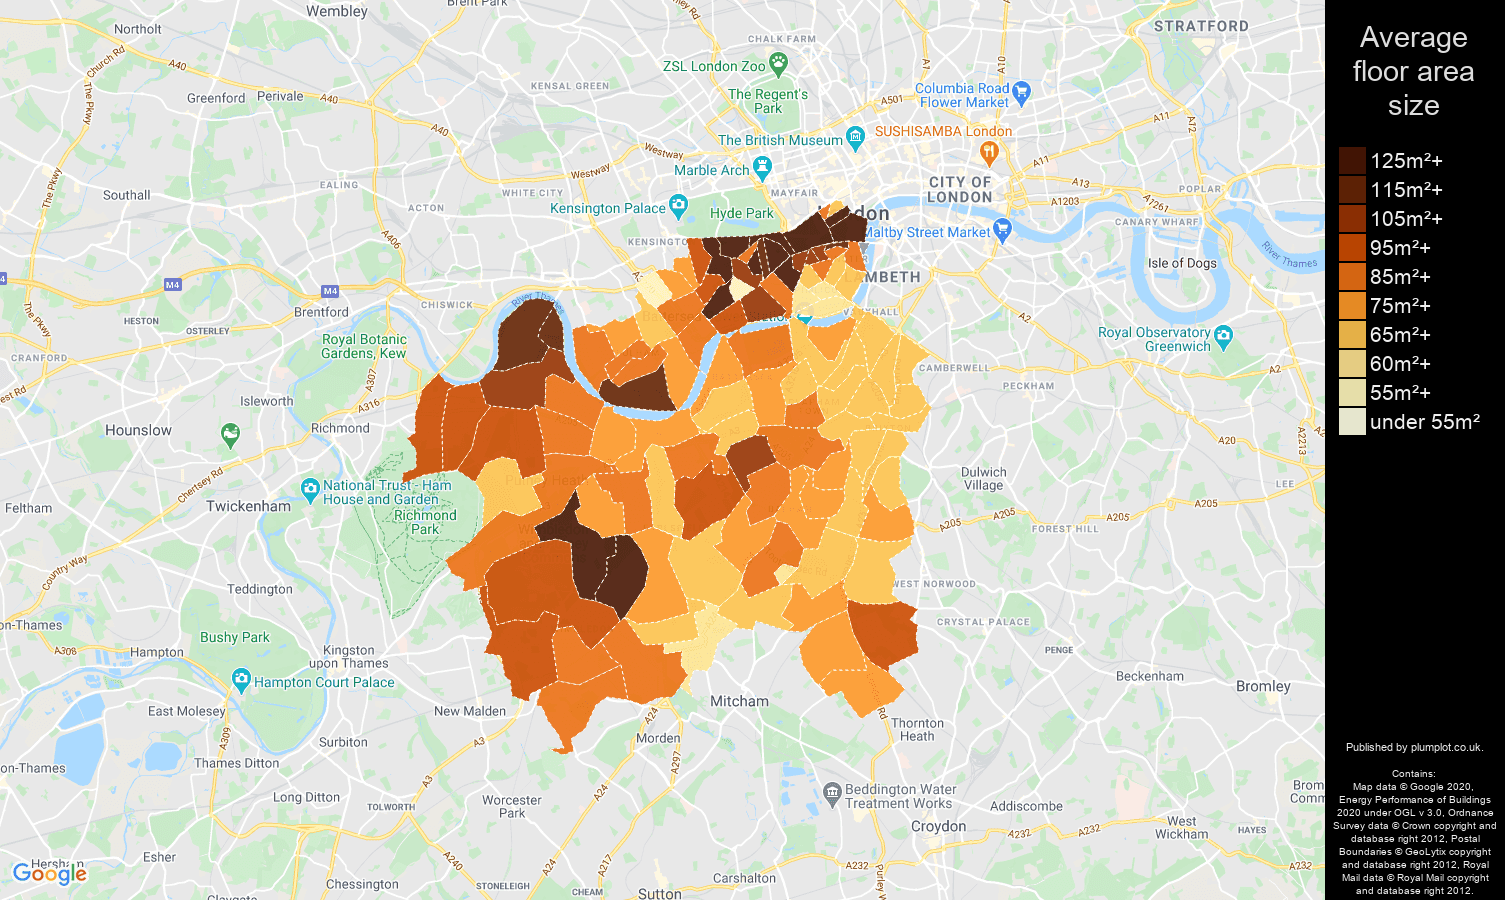 South West London map of average floor area size of properties